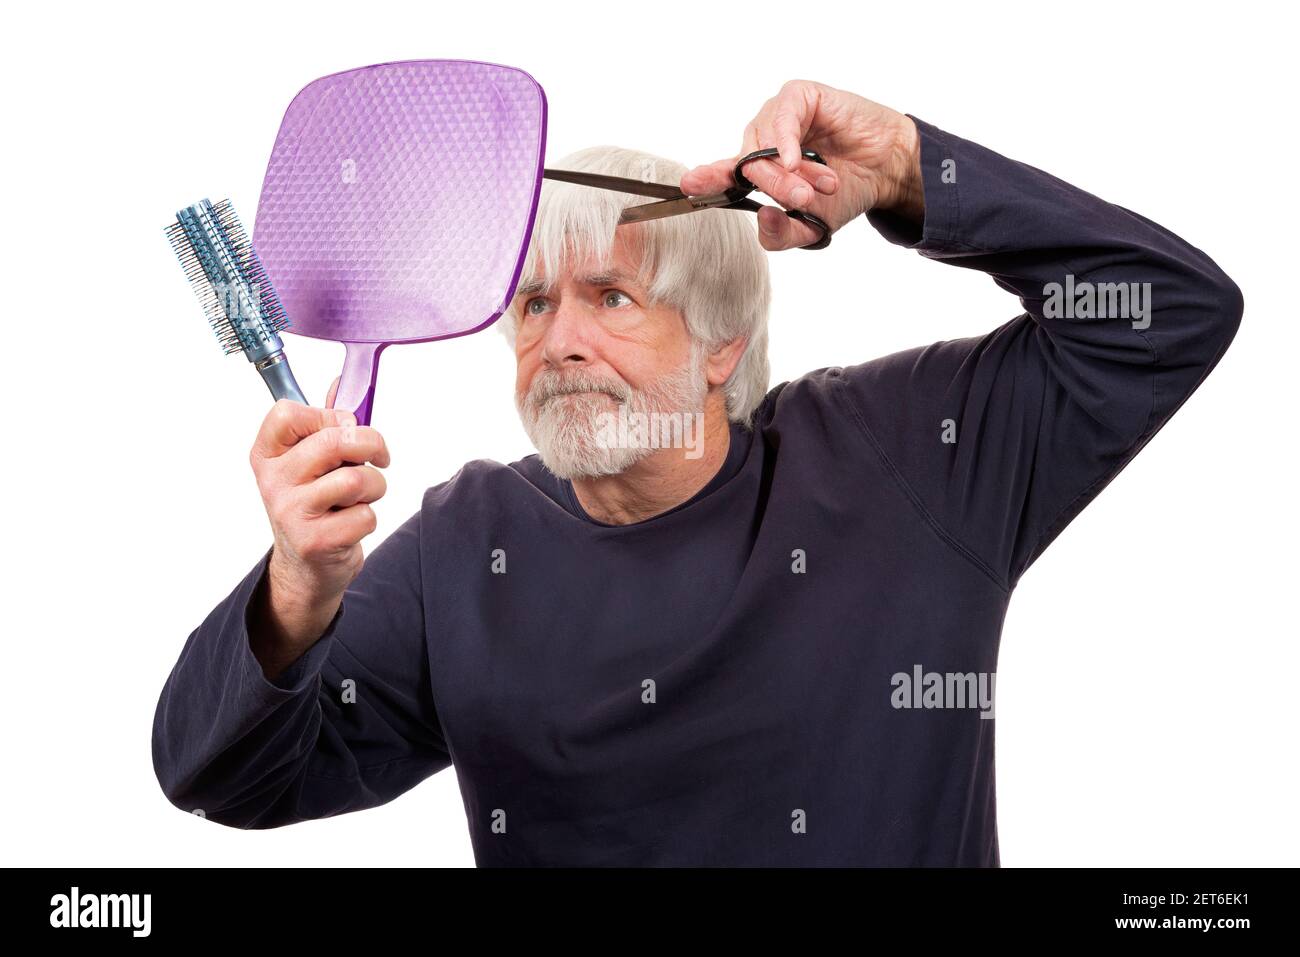 Horizontal shot of an old man giving himself a pandemic haircut.  White background. Stock Photo